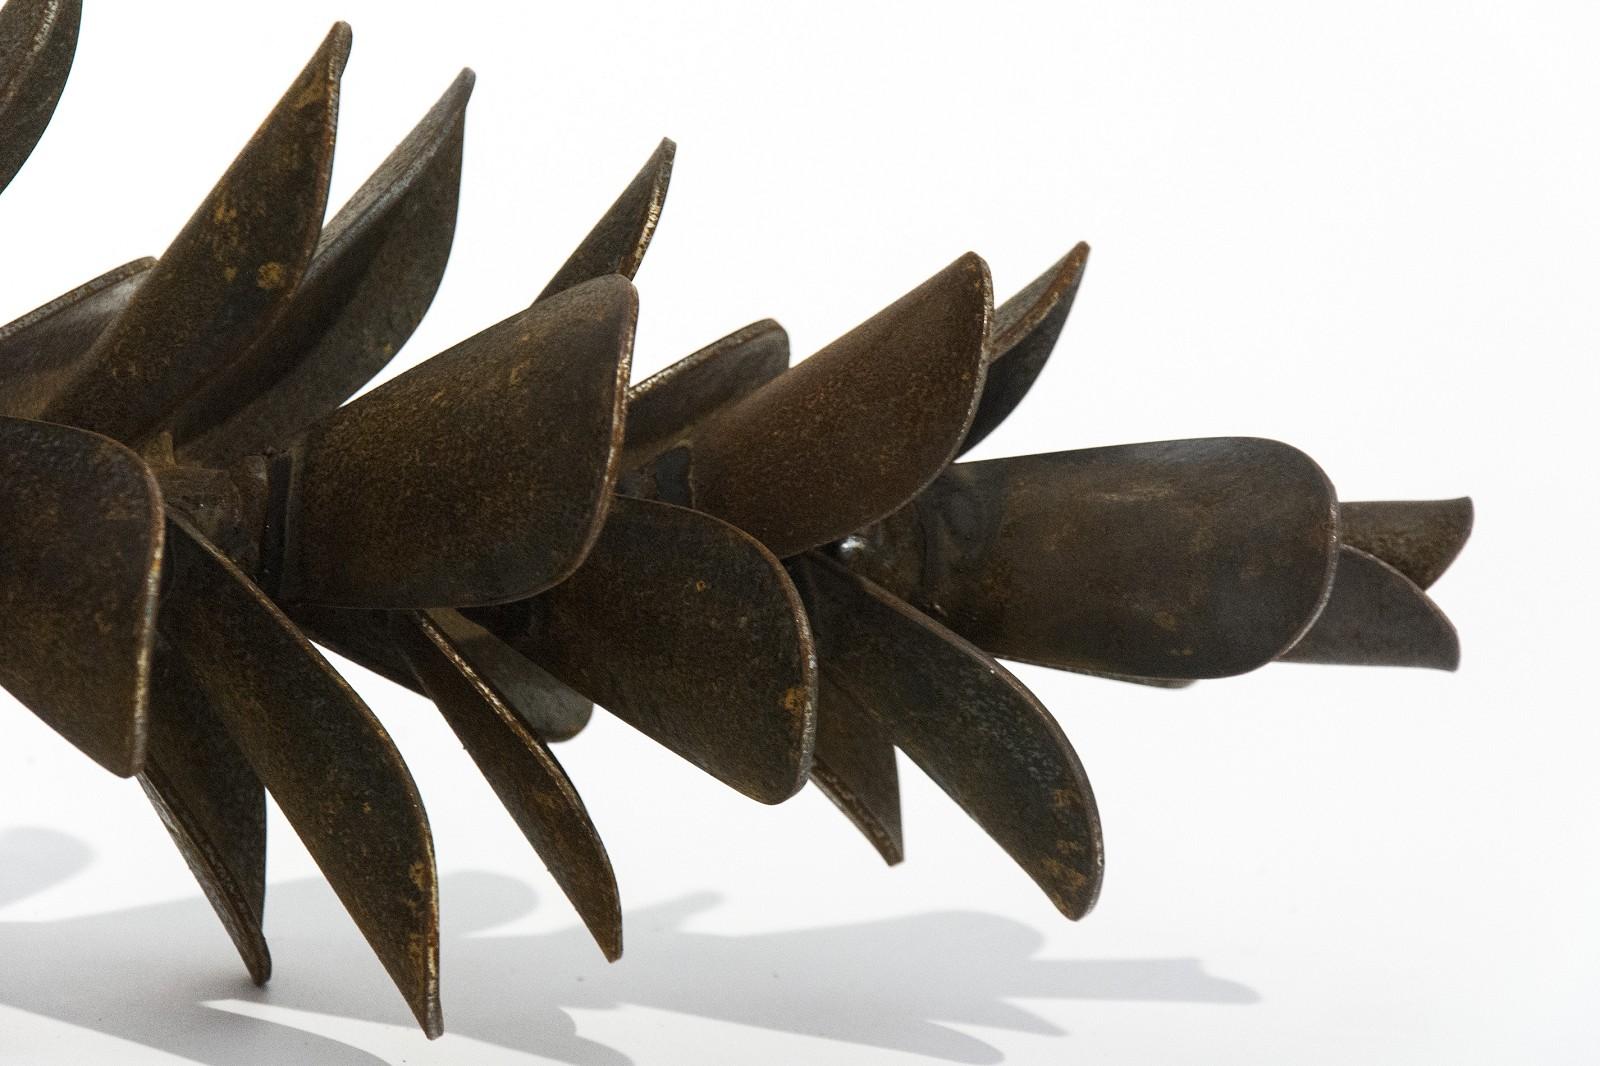 Pine Cone Corten Steel - Naturally weathered rusted surface - Sculpture by Floyd Elzinga